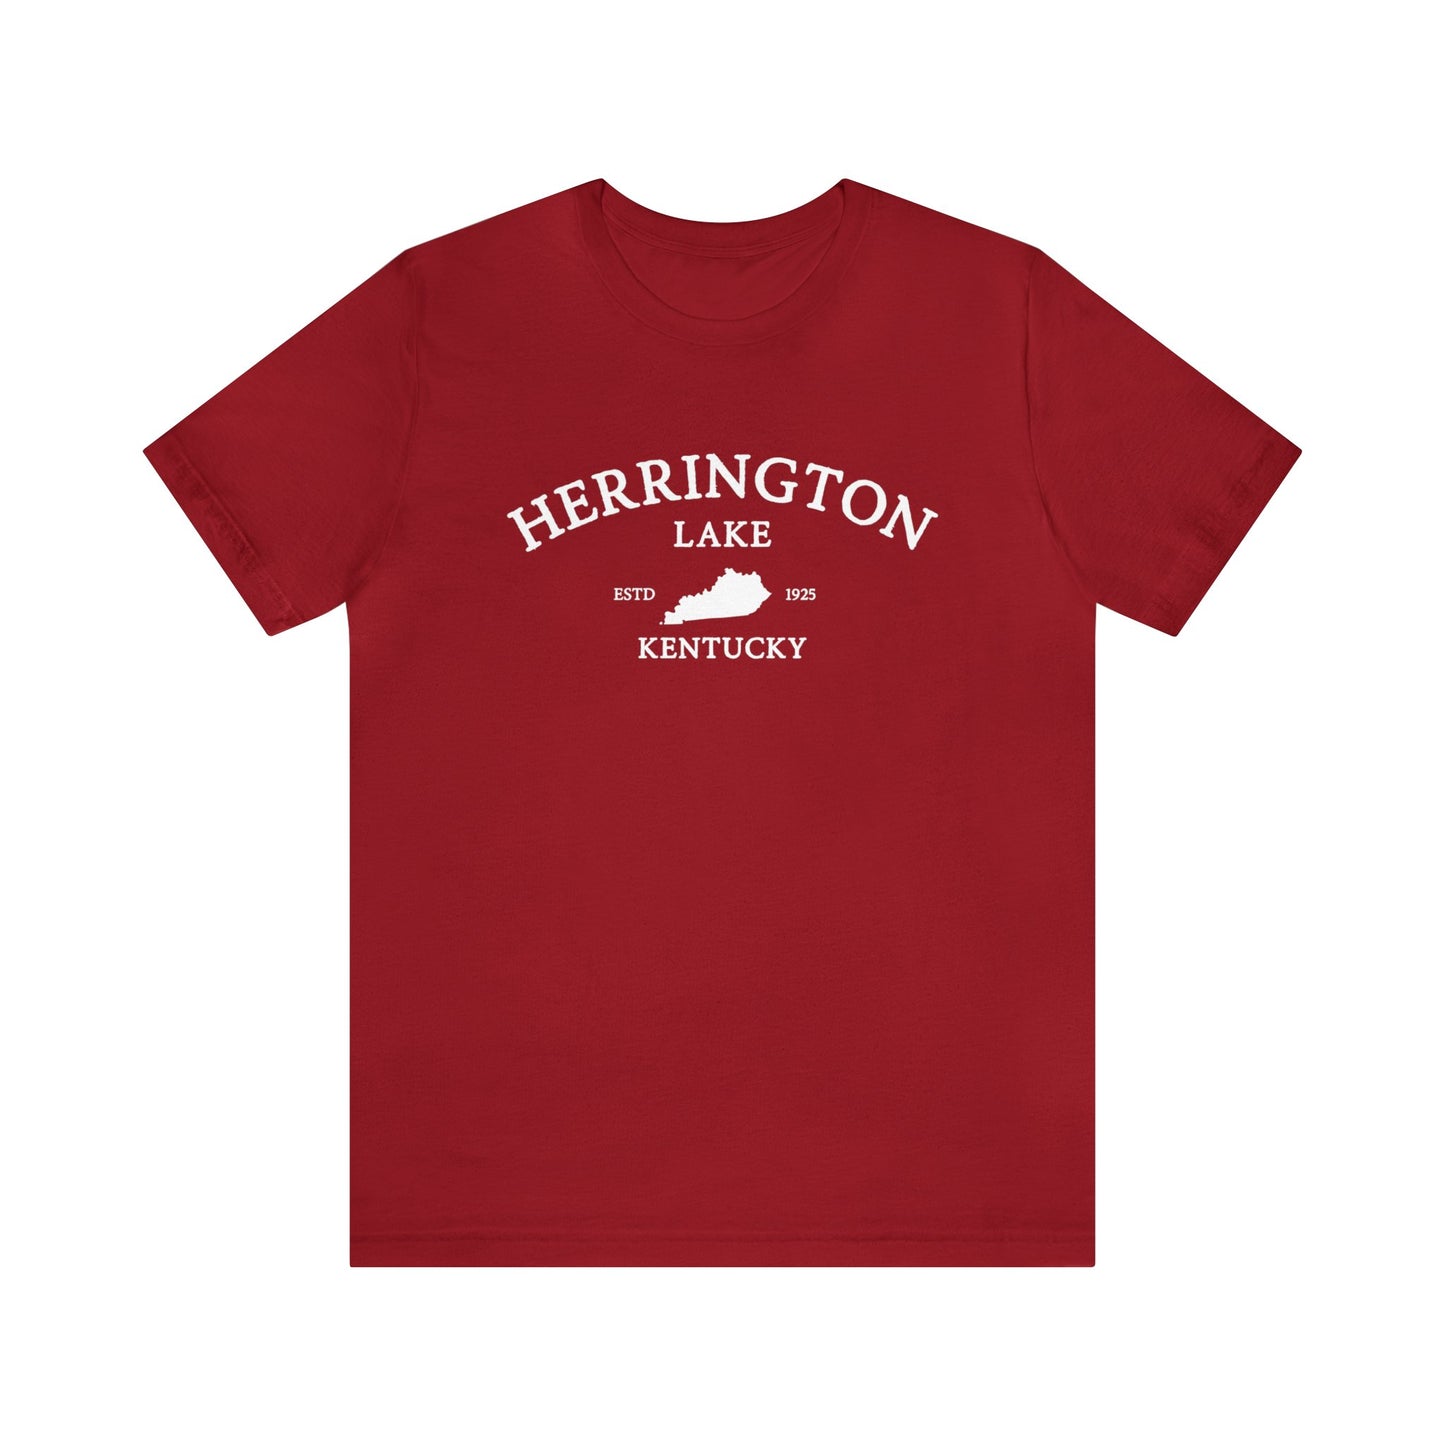 EXPRESS - "Simply Herrington" Signature Collection Jersey Knit Cotton Short Sleeve Tee